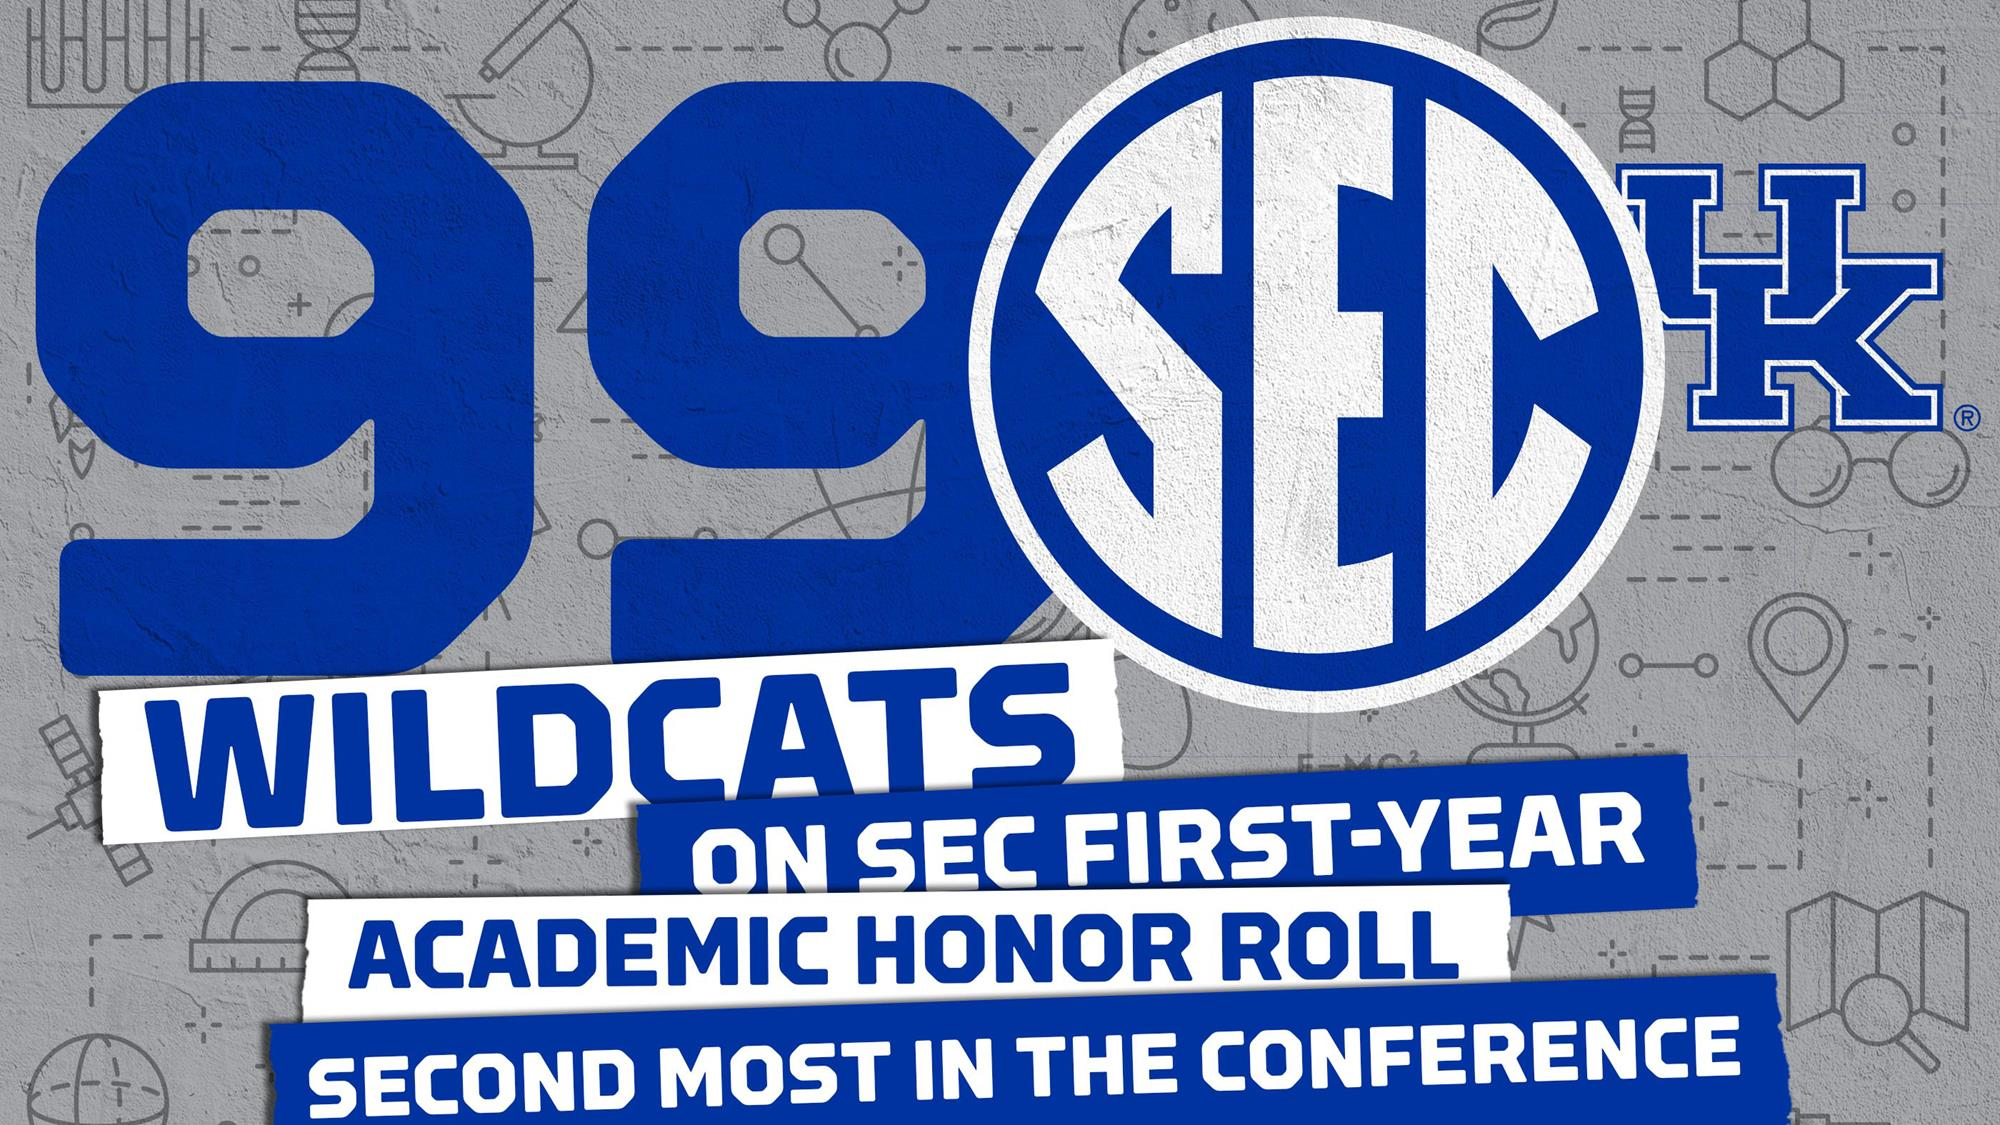 99 Wildcats on SEC First-Year Academic Honor Roll